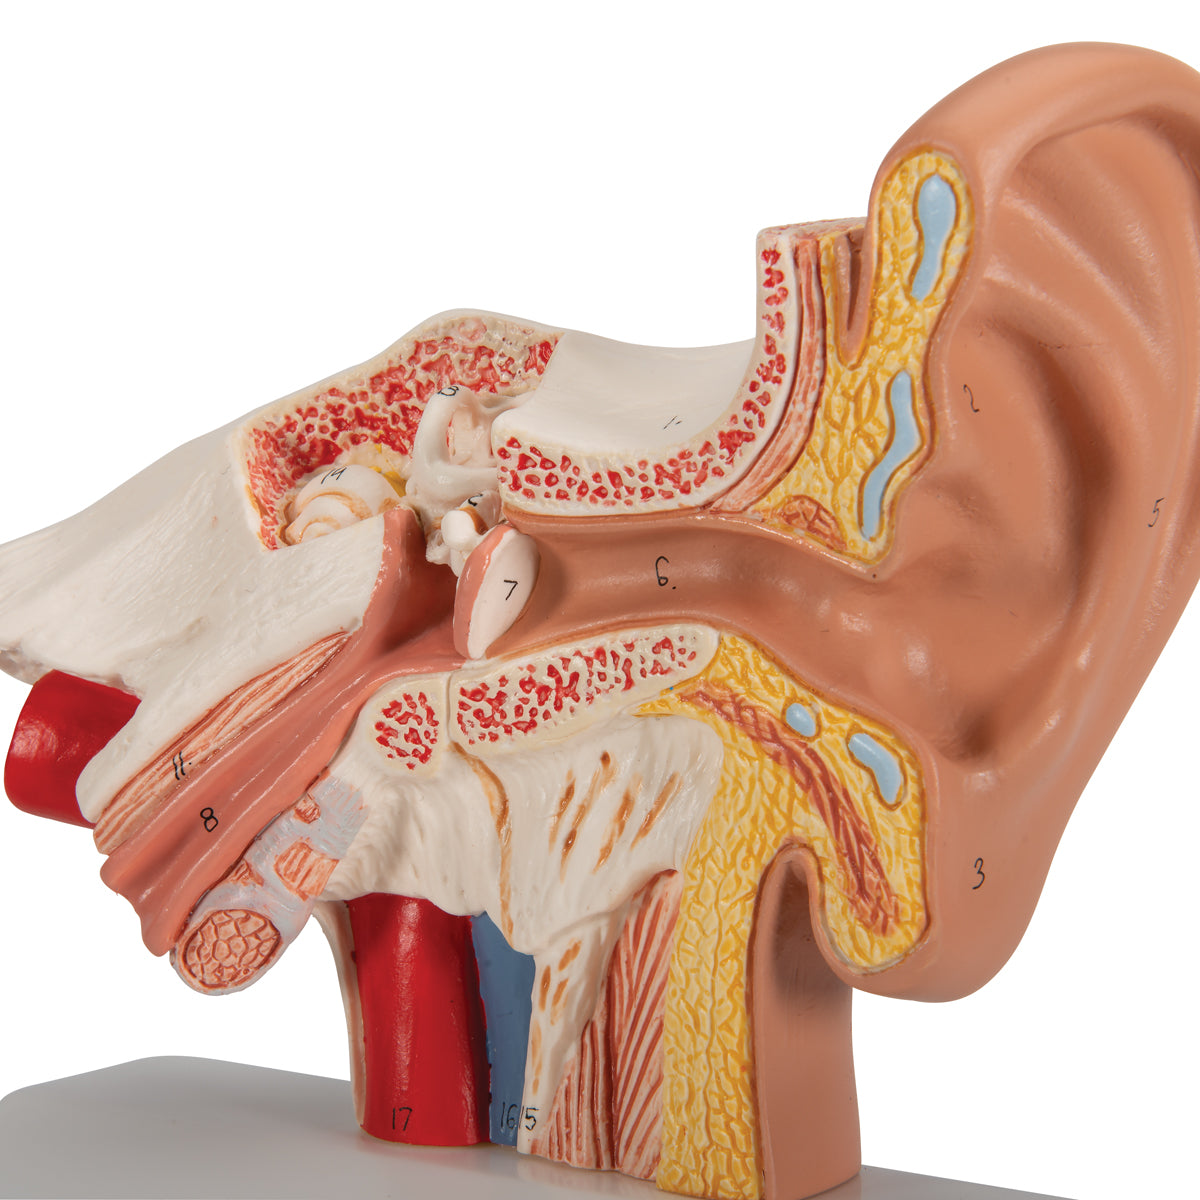 Classic ear model which has been enlarged